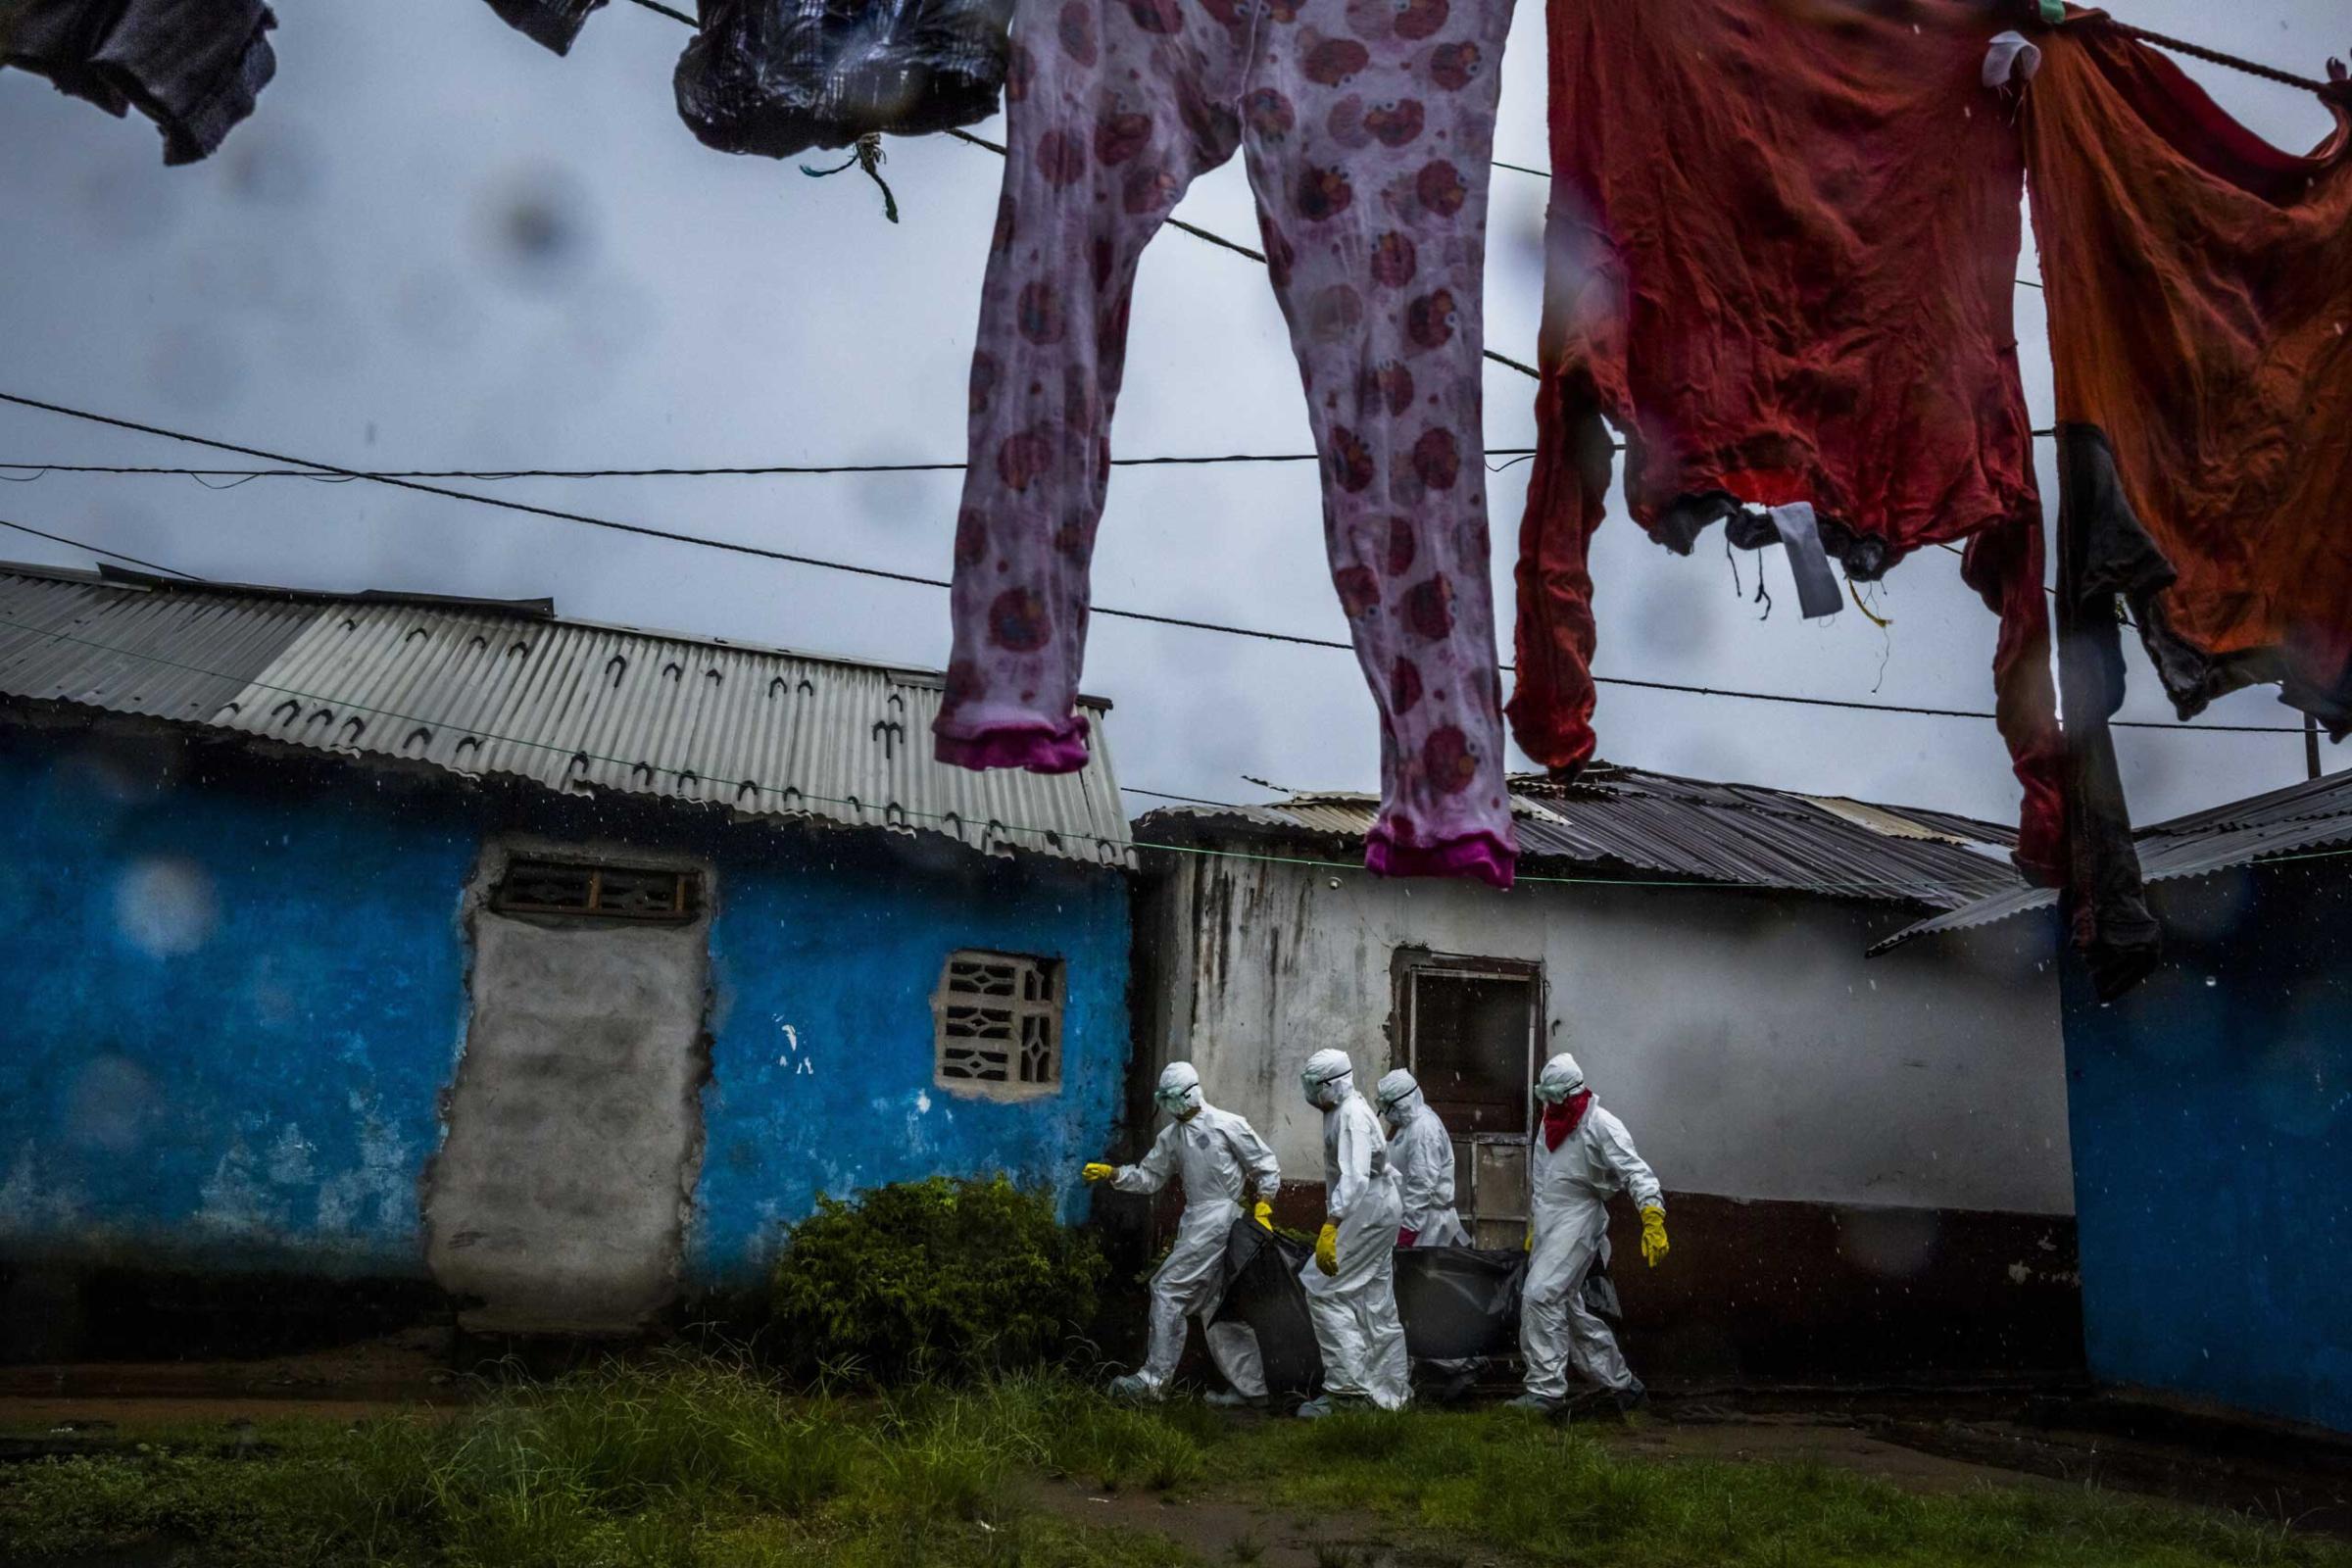 A burial team collects the body of a 75-year-old woman in a neighborhood called PHP in Monrovia, Liberia.